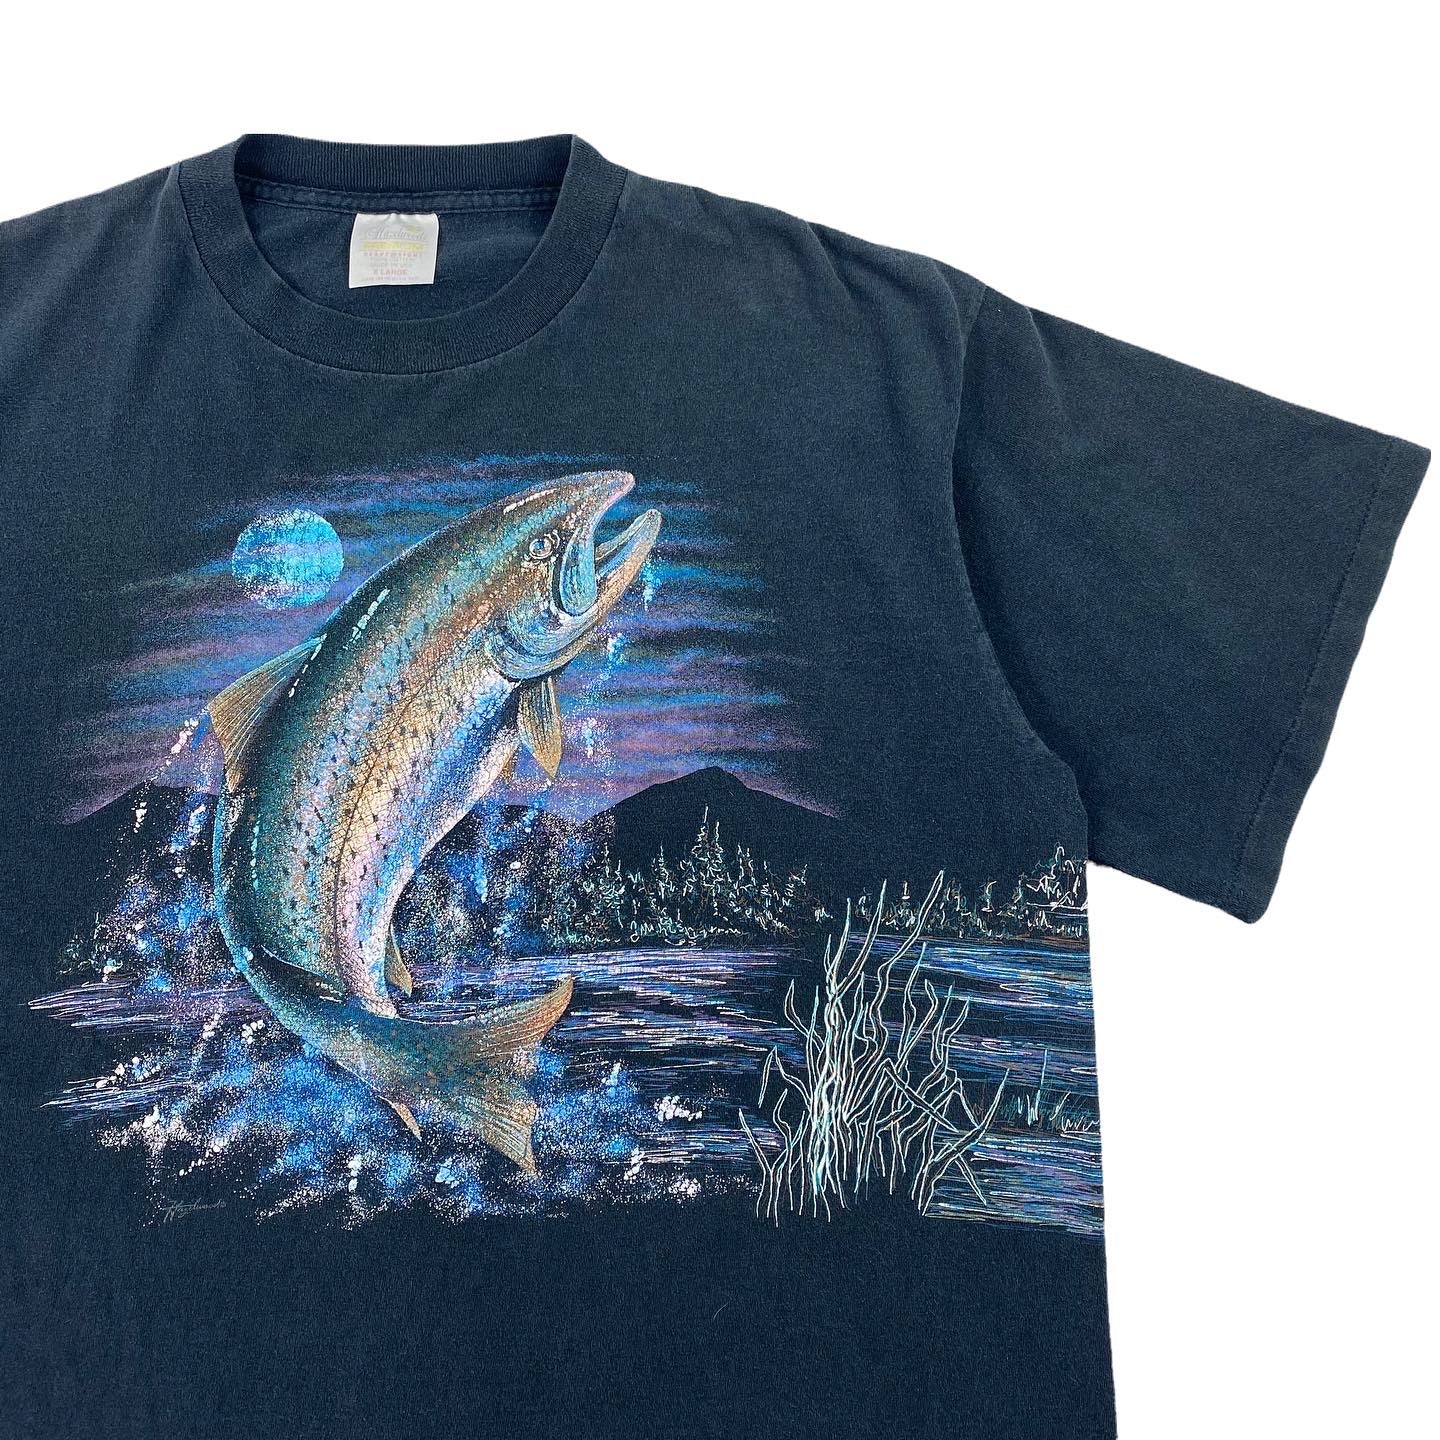 Jumping trout tee. XL